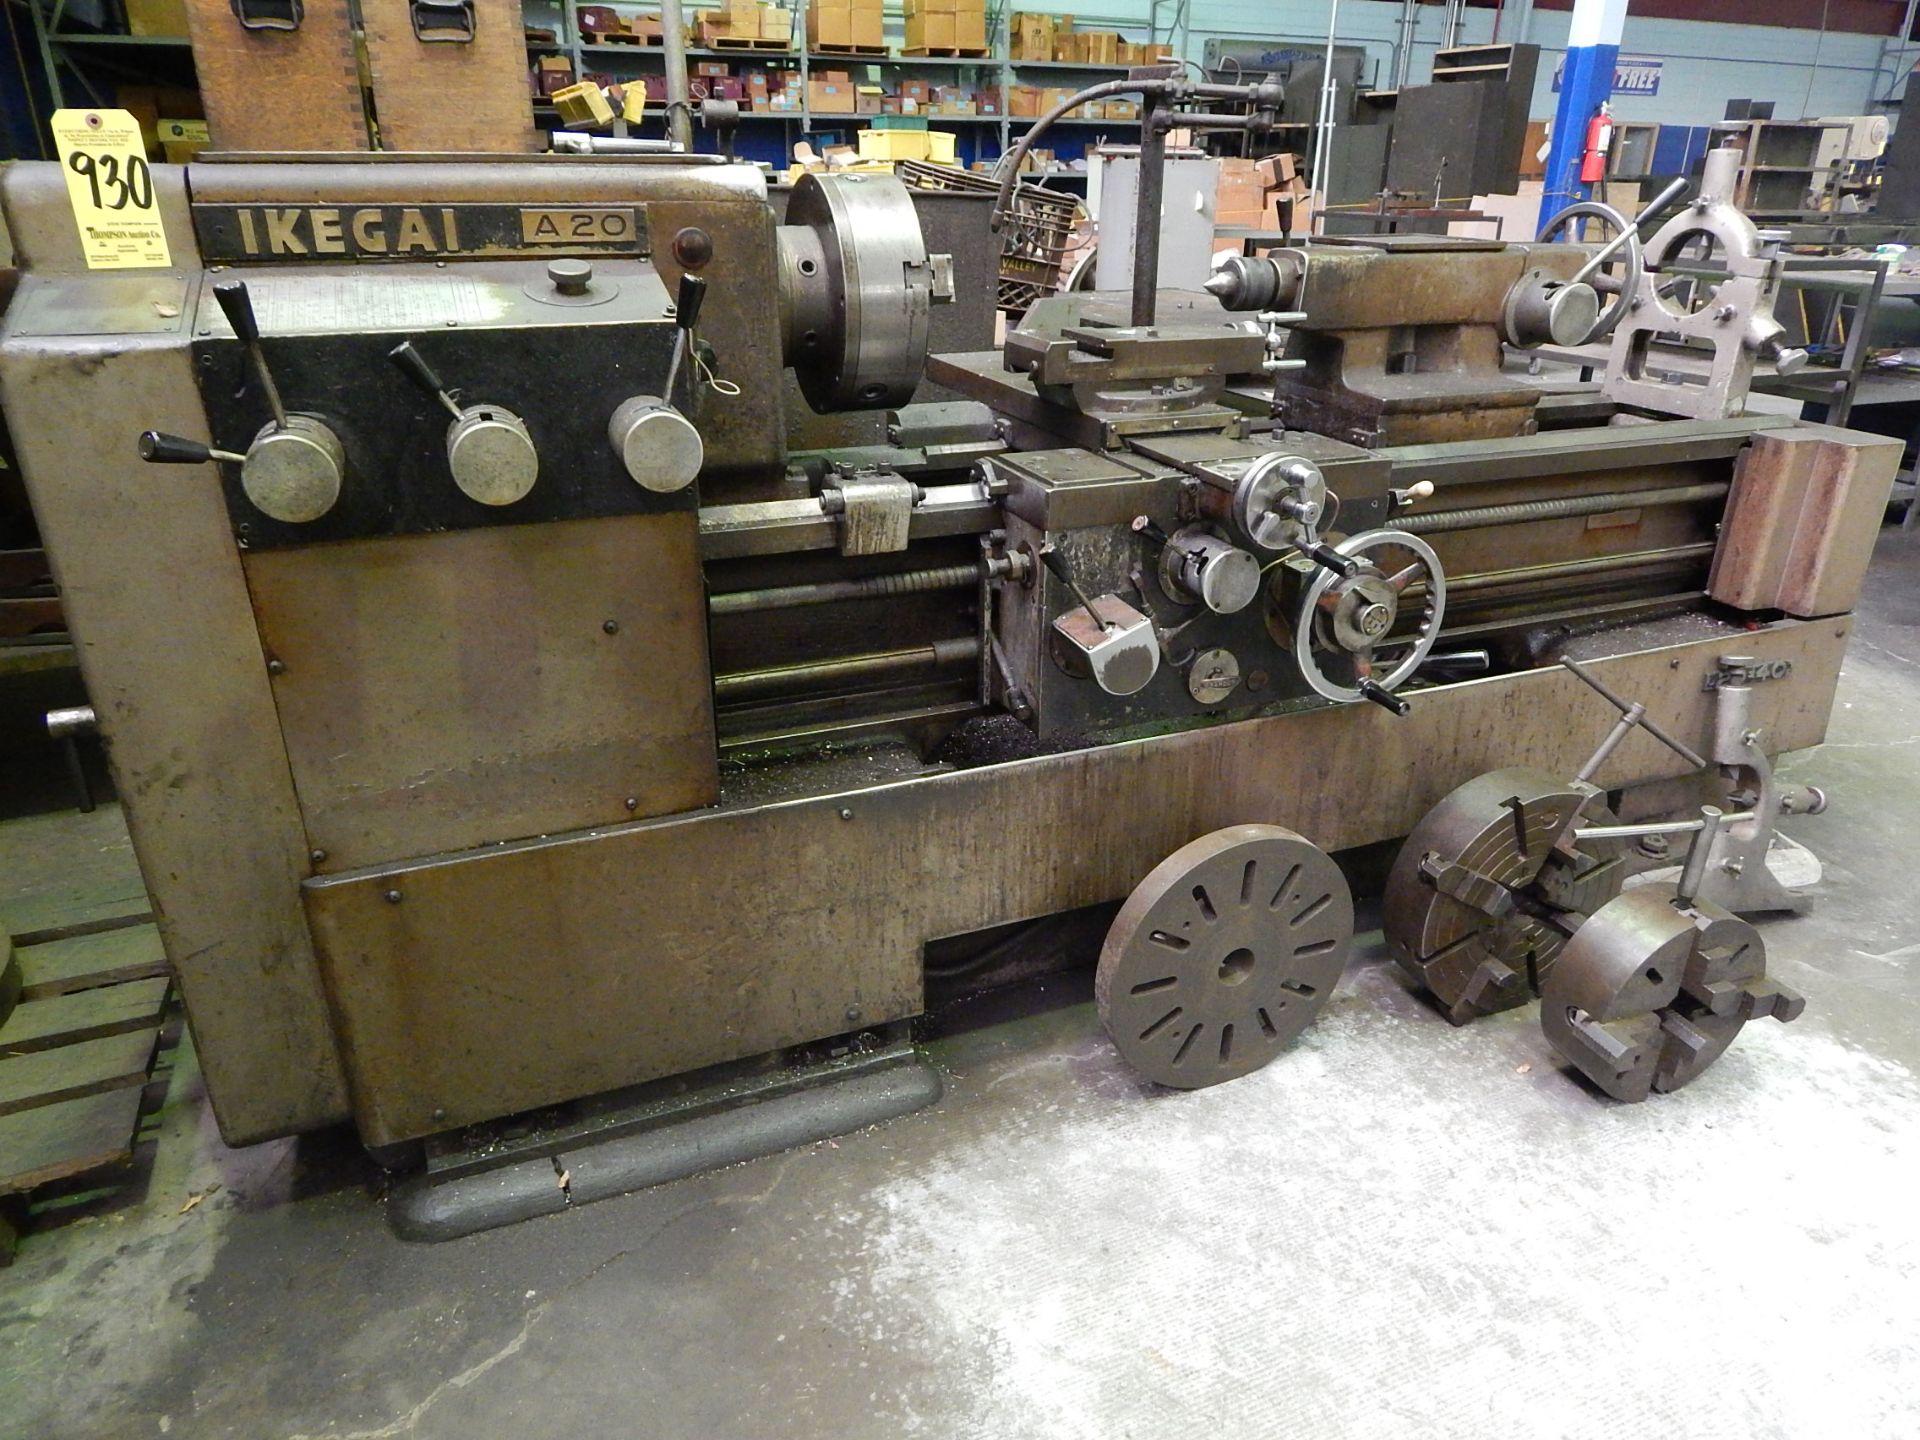 Ikegai Model A20 Engine Lathe, s/n 9534T, 20 In. X 60 In. Capacity, Inch/Metric,12 Inch 3-Jaw Chuck, - Image 2 of 9